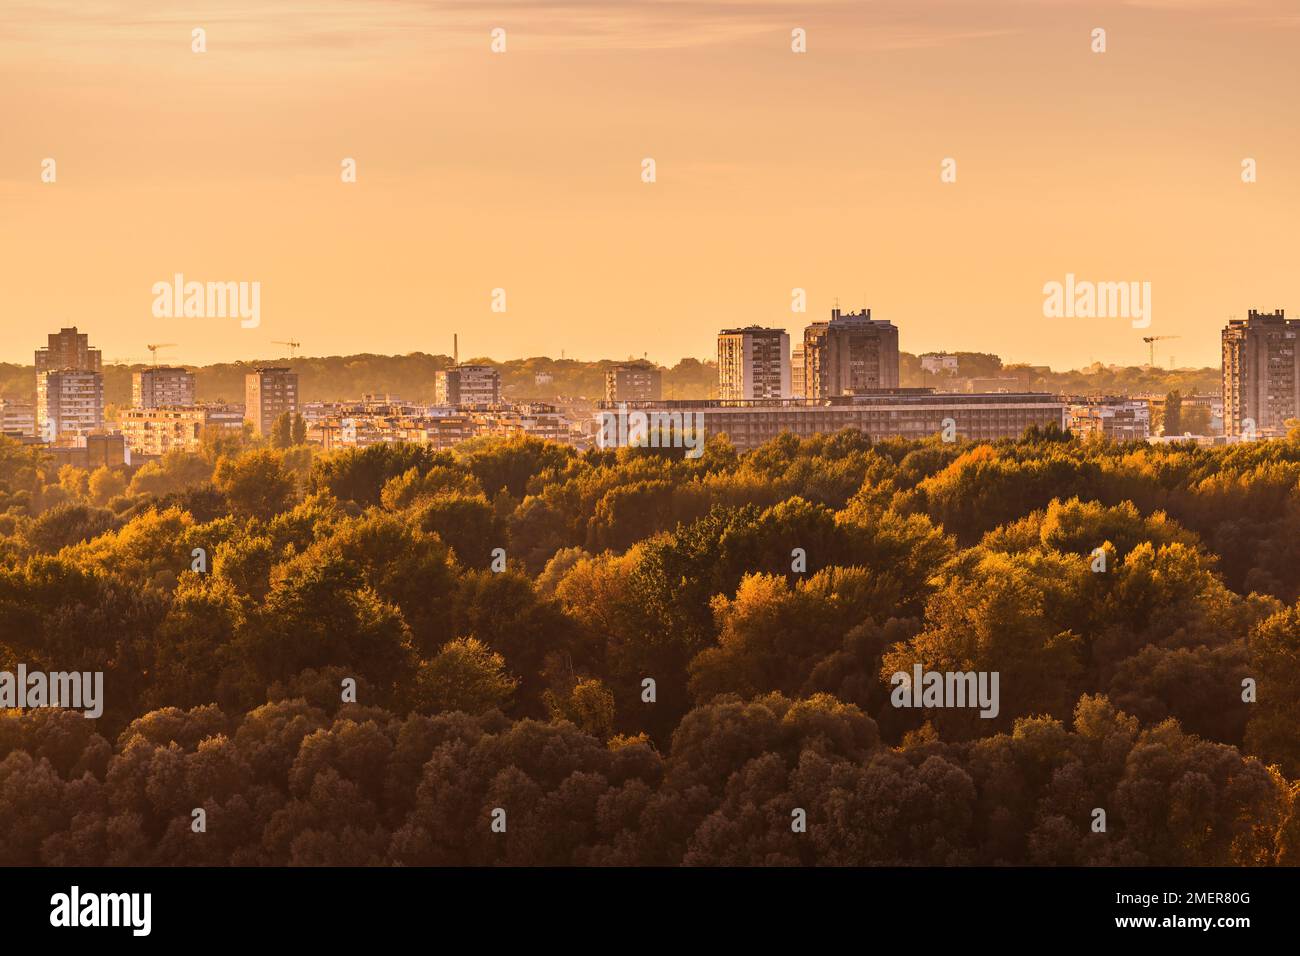 New Belgrade city skyline over the Great War Island forest in sunset Stock Photo